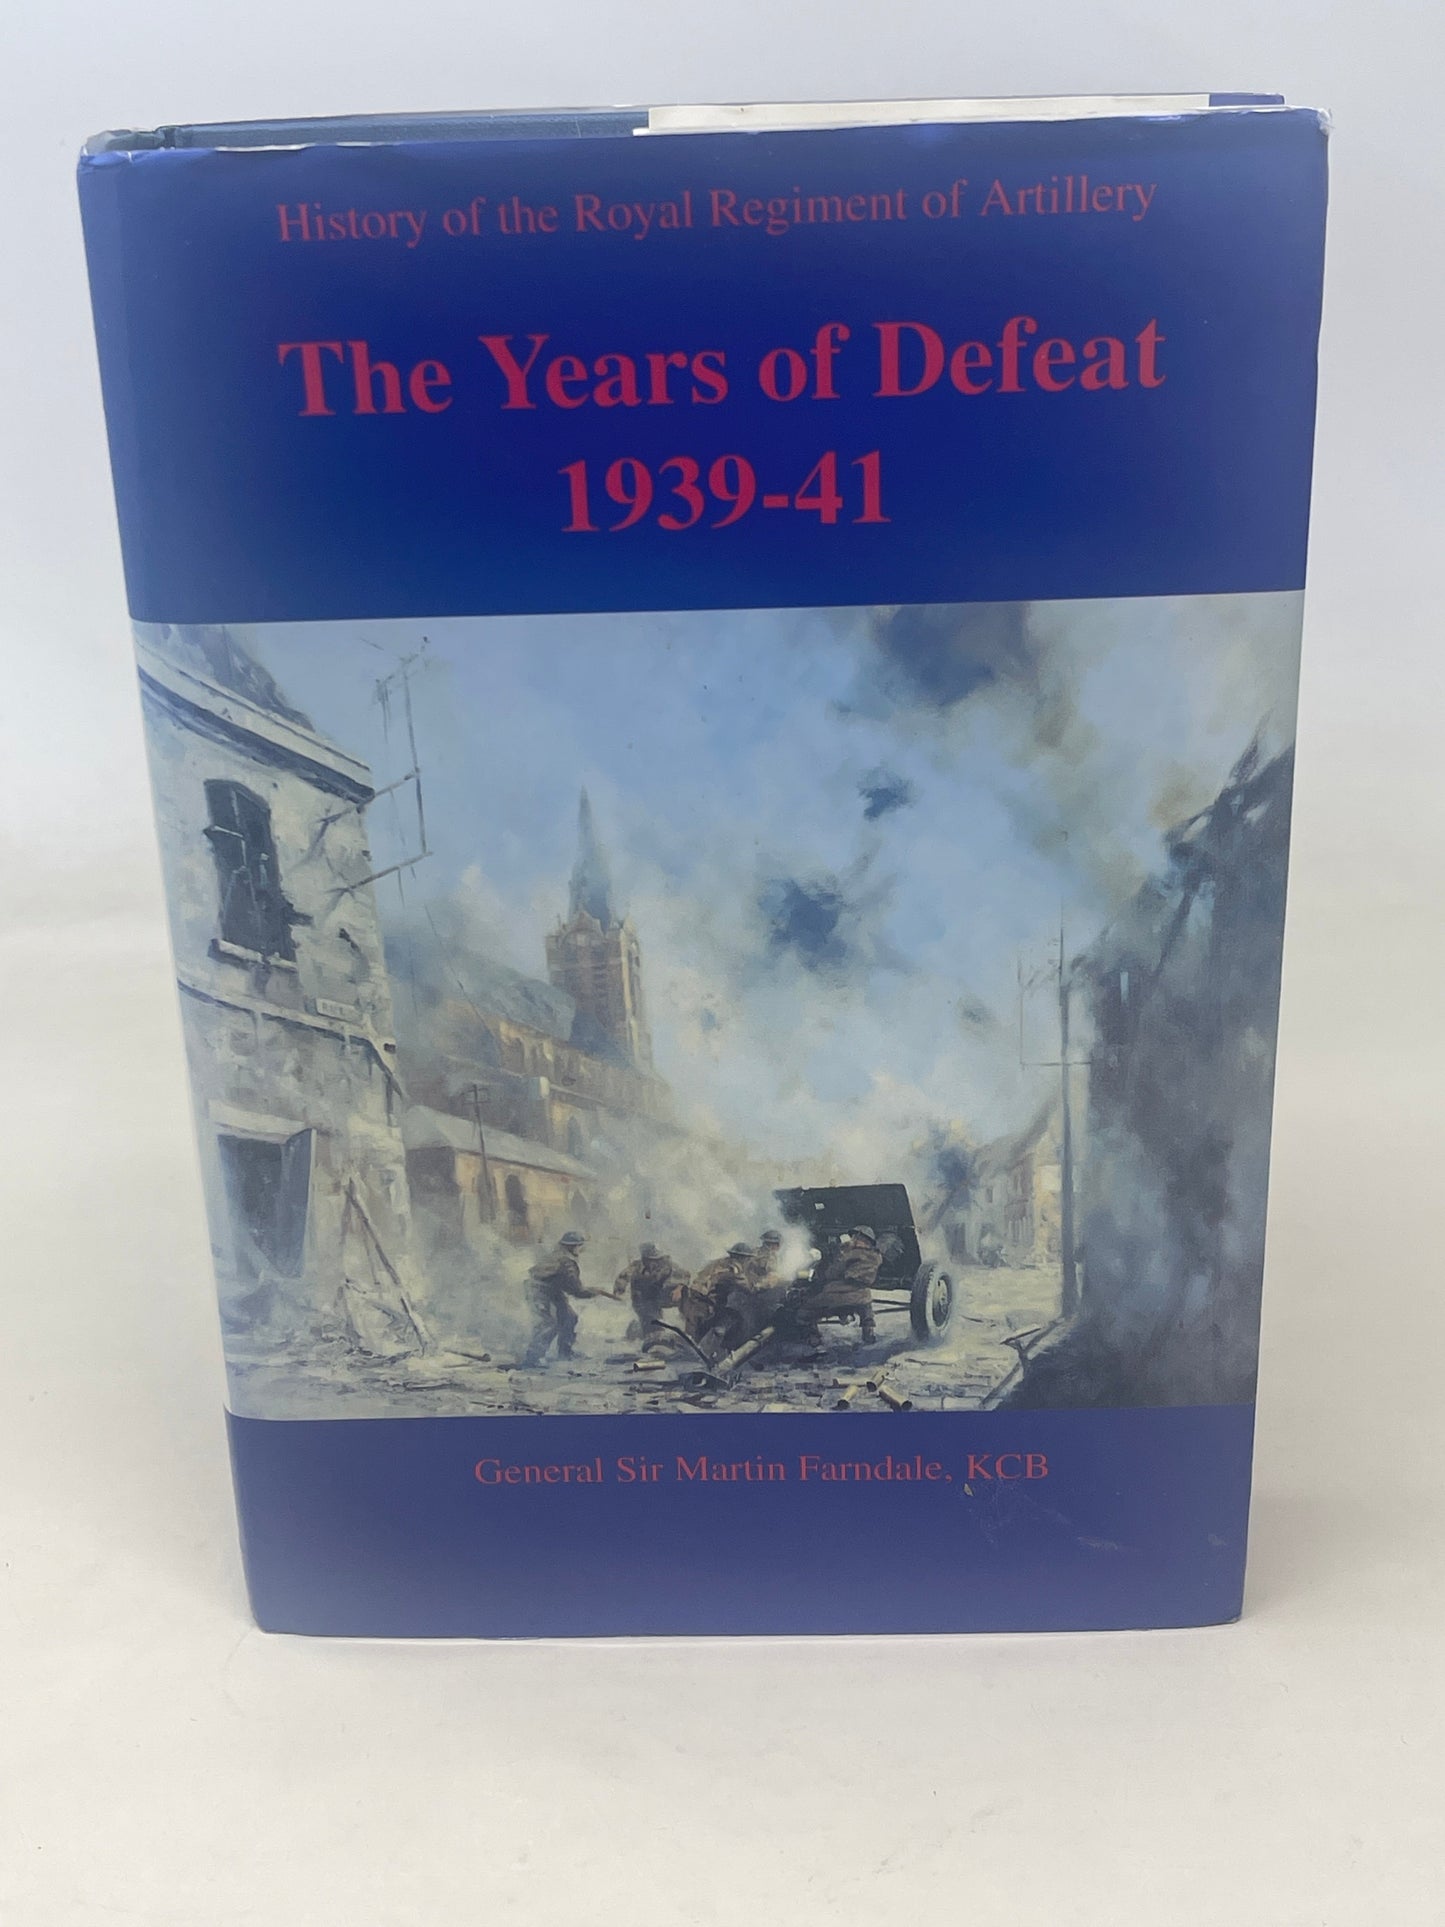 The Years of Defeat 1939-41